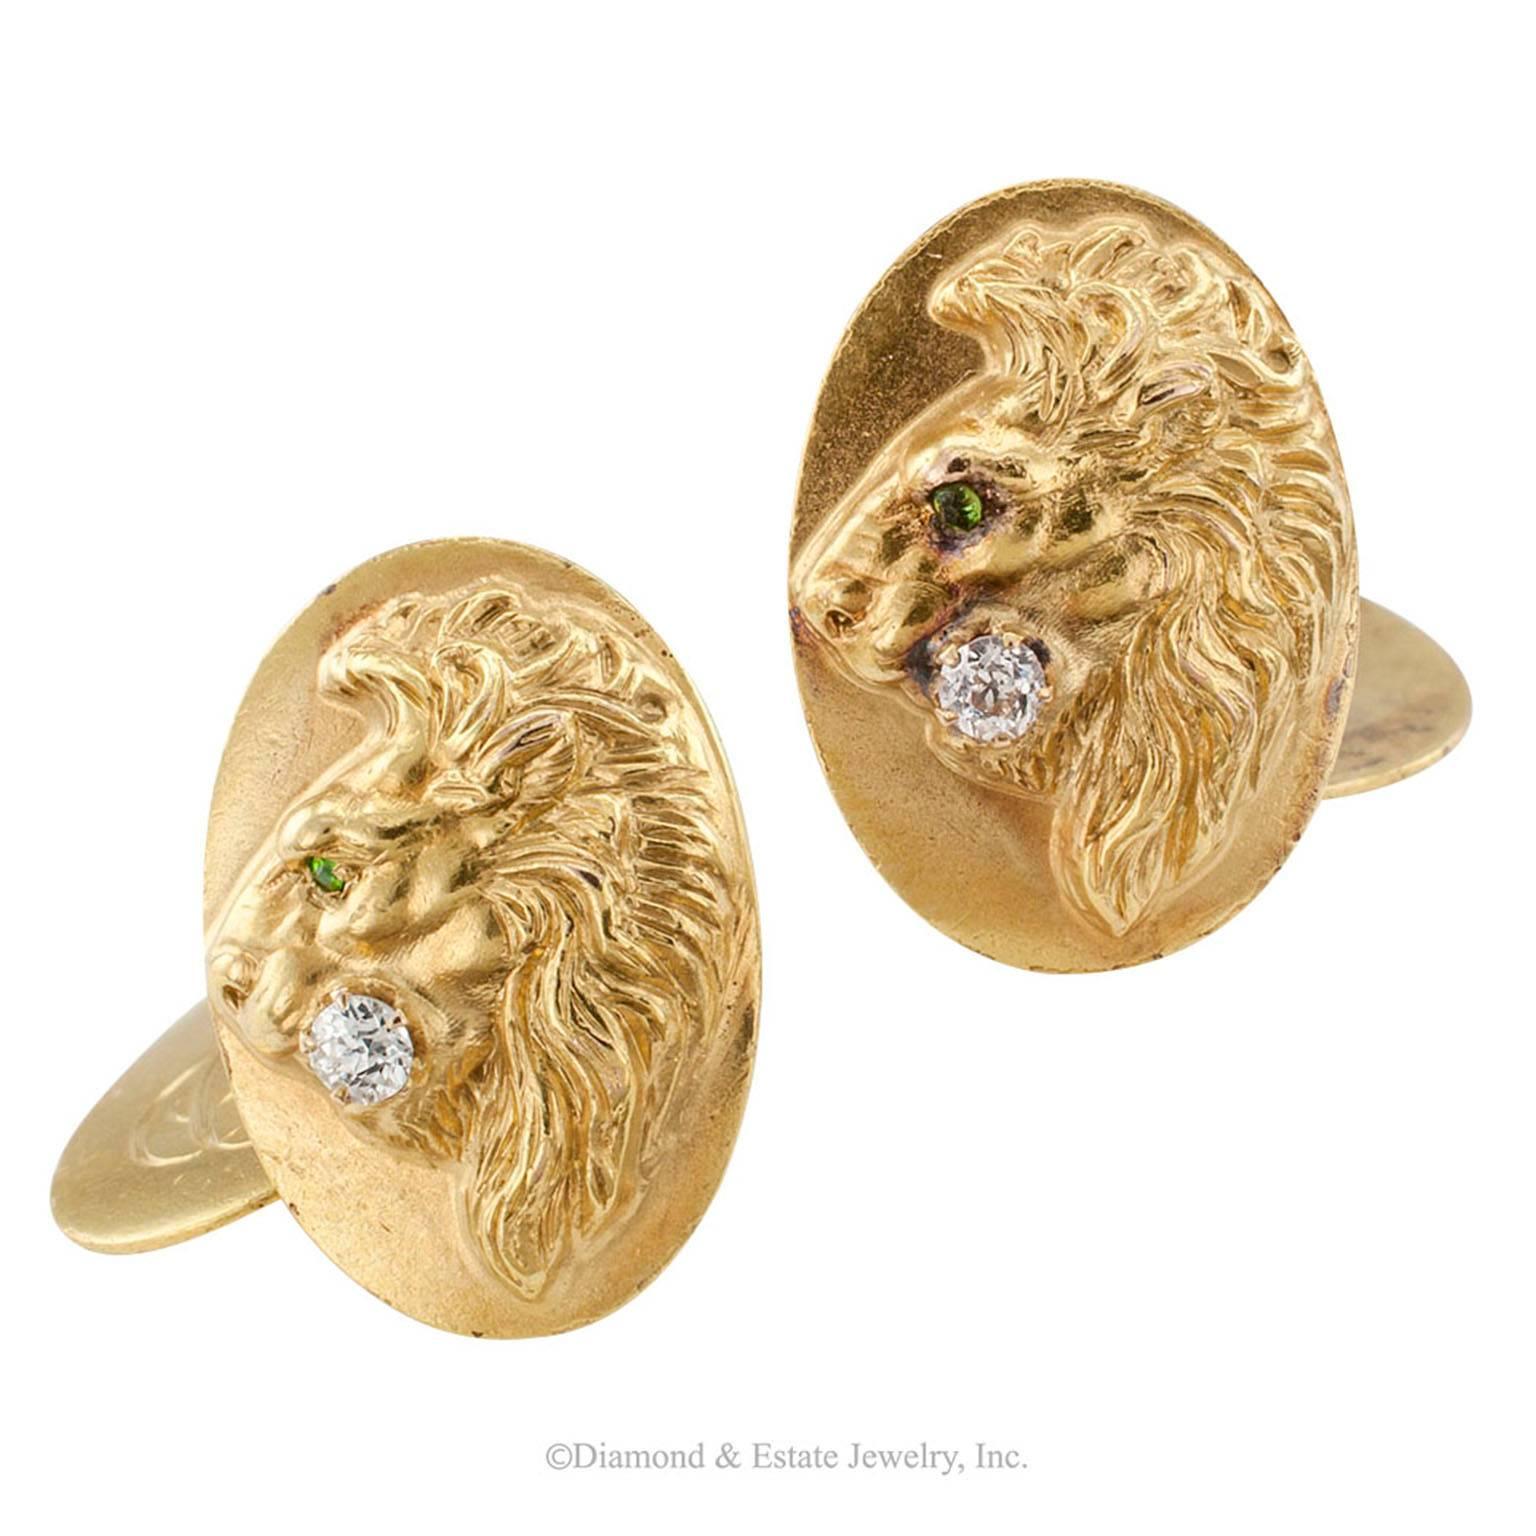 Art Nouveau Demantoid Garnet Diamond Gold Cuff Links

Art Nouveau demantoid garnet and diamond lion head gold cuff links circa 1905.  The front faces depicting in relief the profile of a male lion, the eye set with a faceted demantoid garnet and a